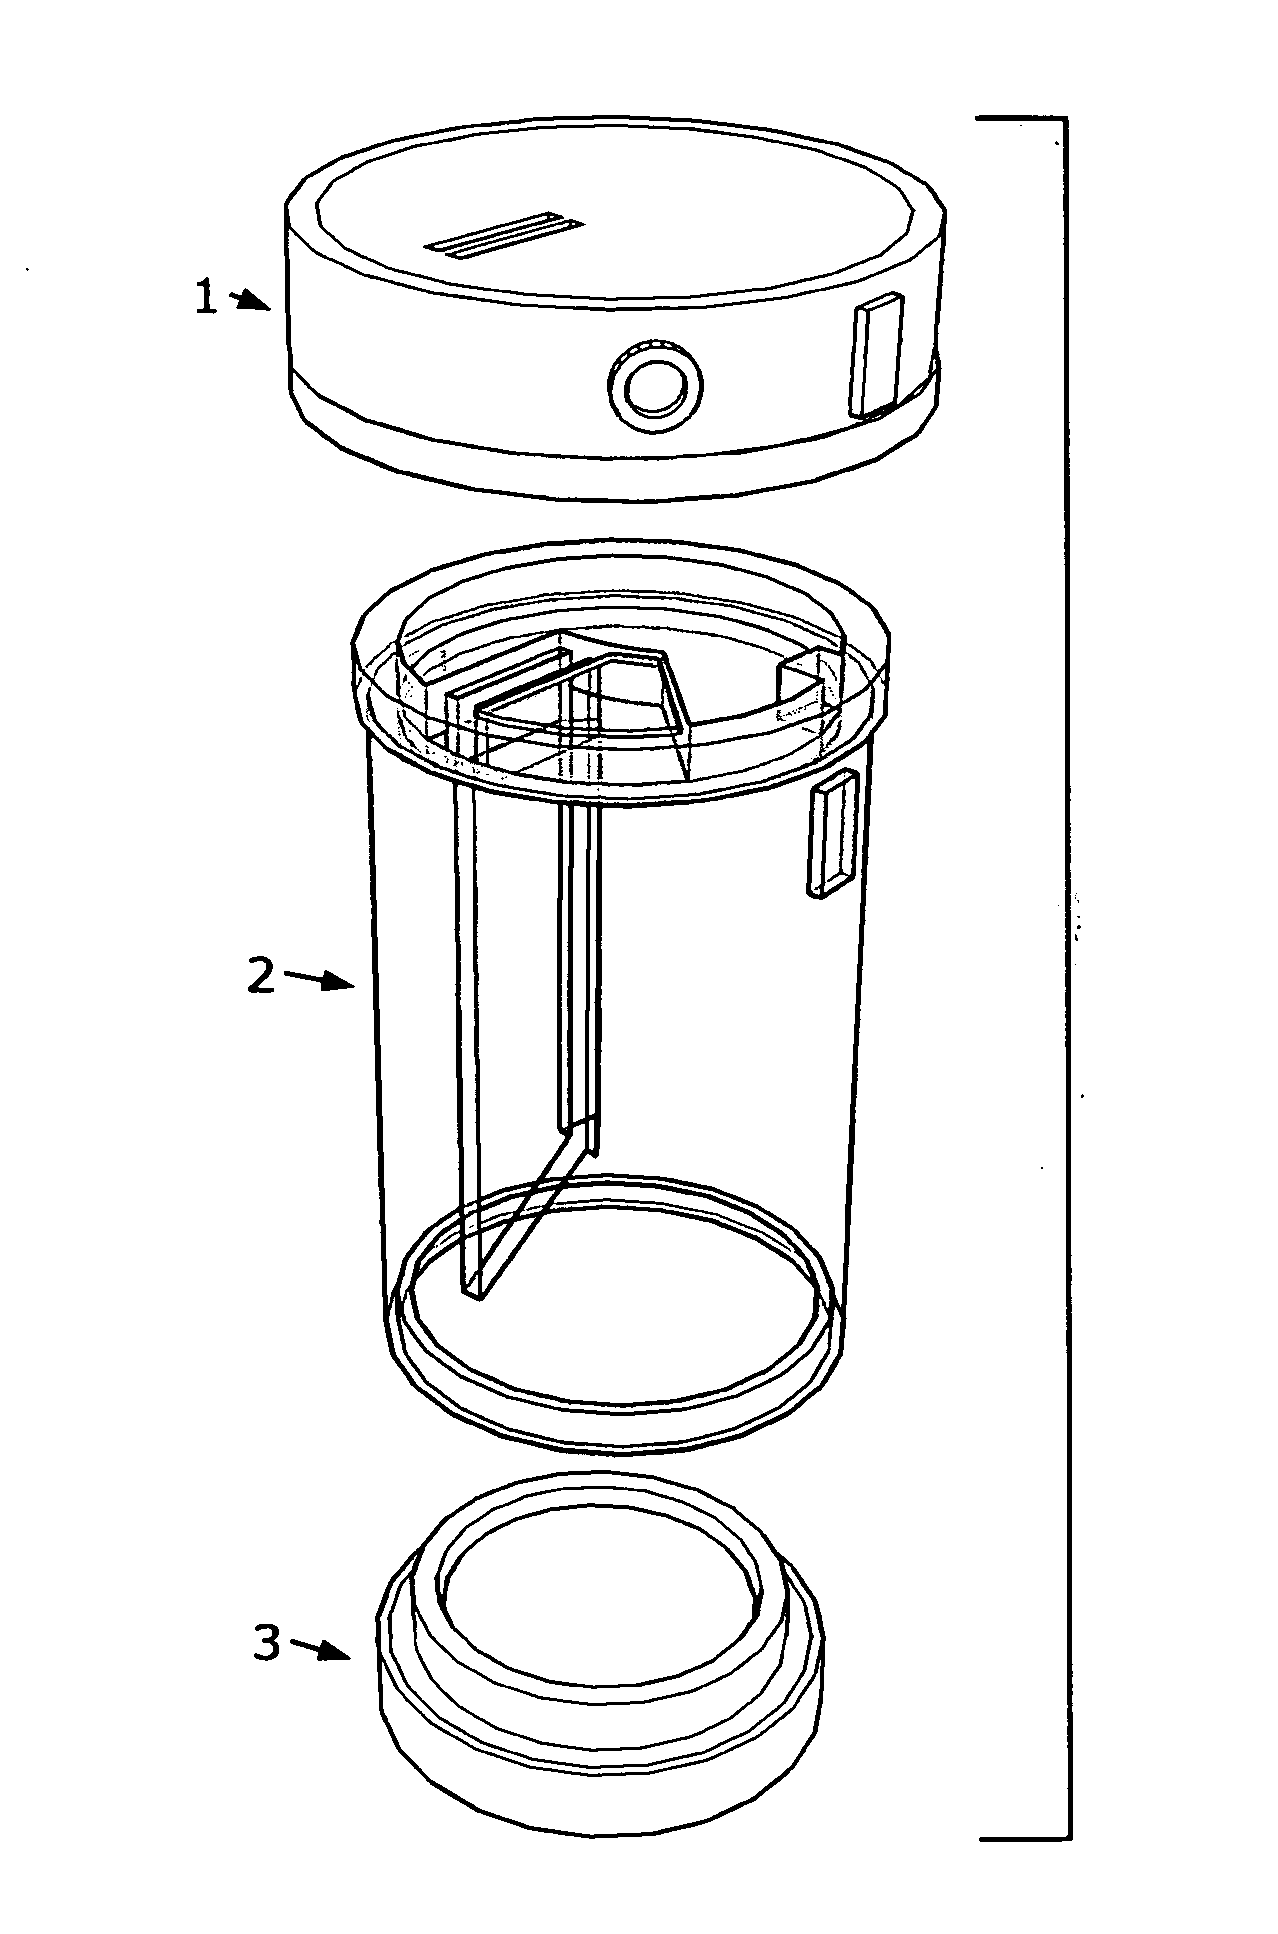 Device for singulating and dispensing rigid and semi-rigid strips